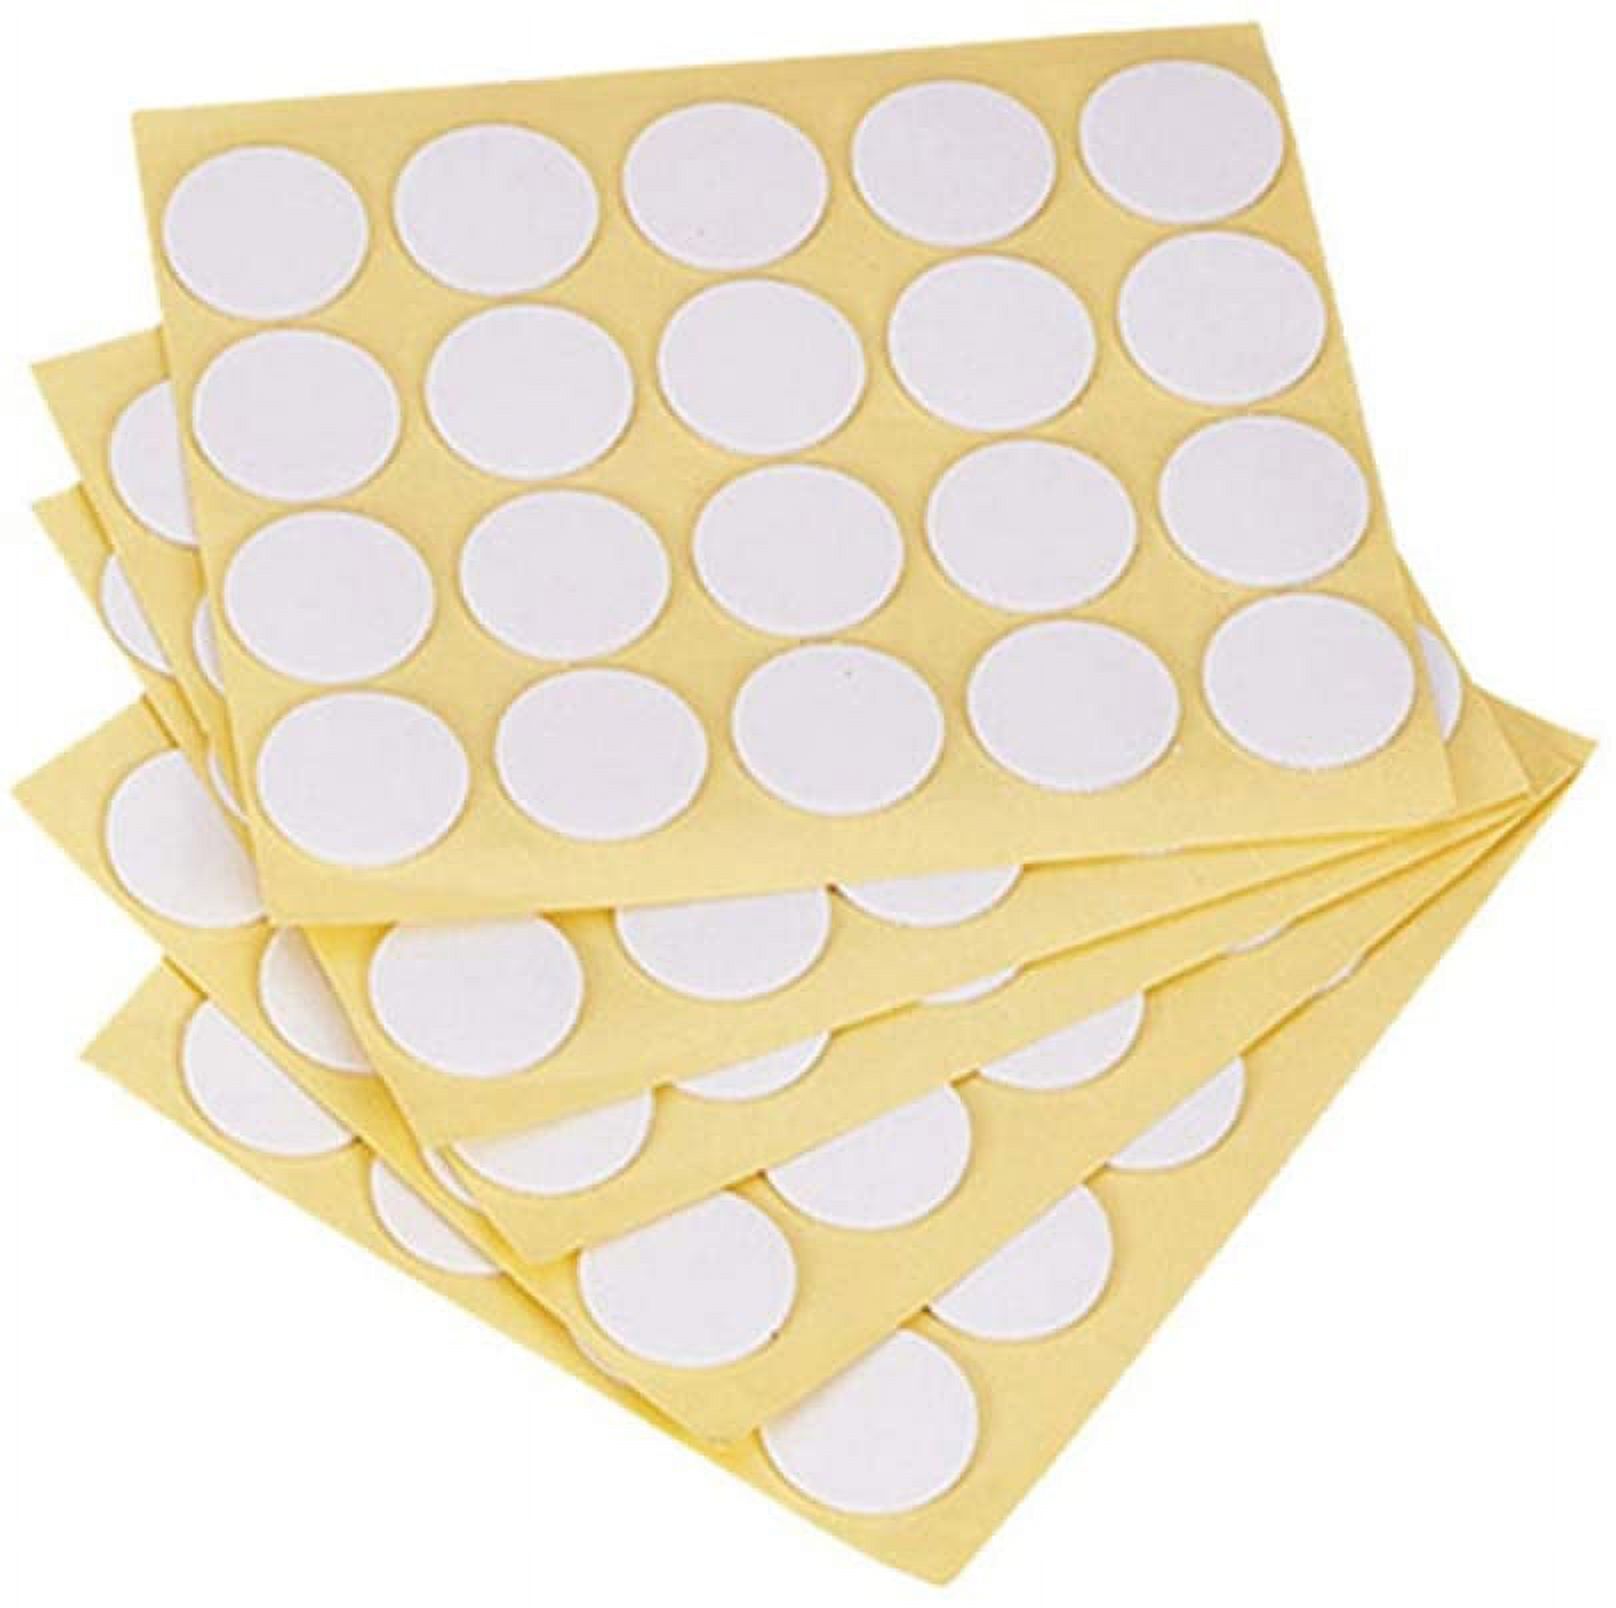 Oderol Lianxiao - 300pcs Candle Wick Stickers Heat Resistant Stickers Double Sided Stickers for Candle Making 15 Sheets (Color : Yellow 300pcs)